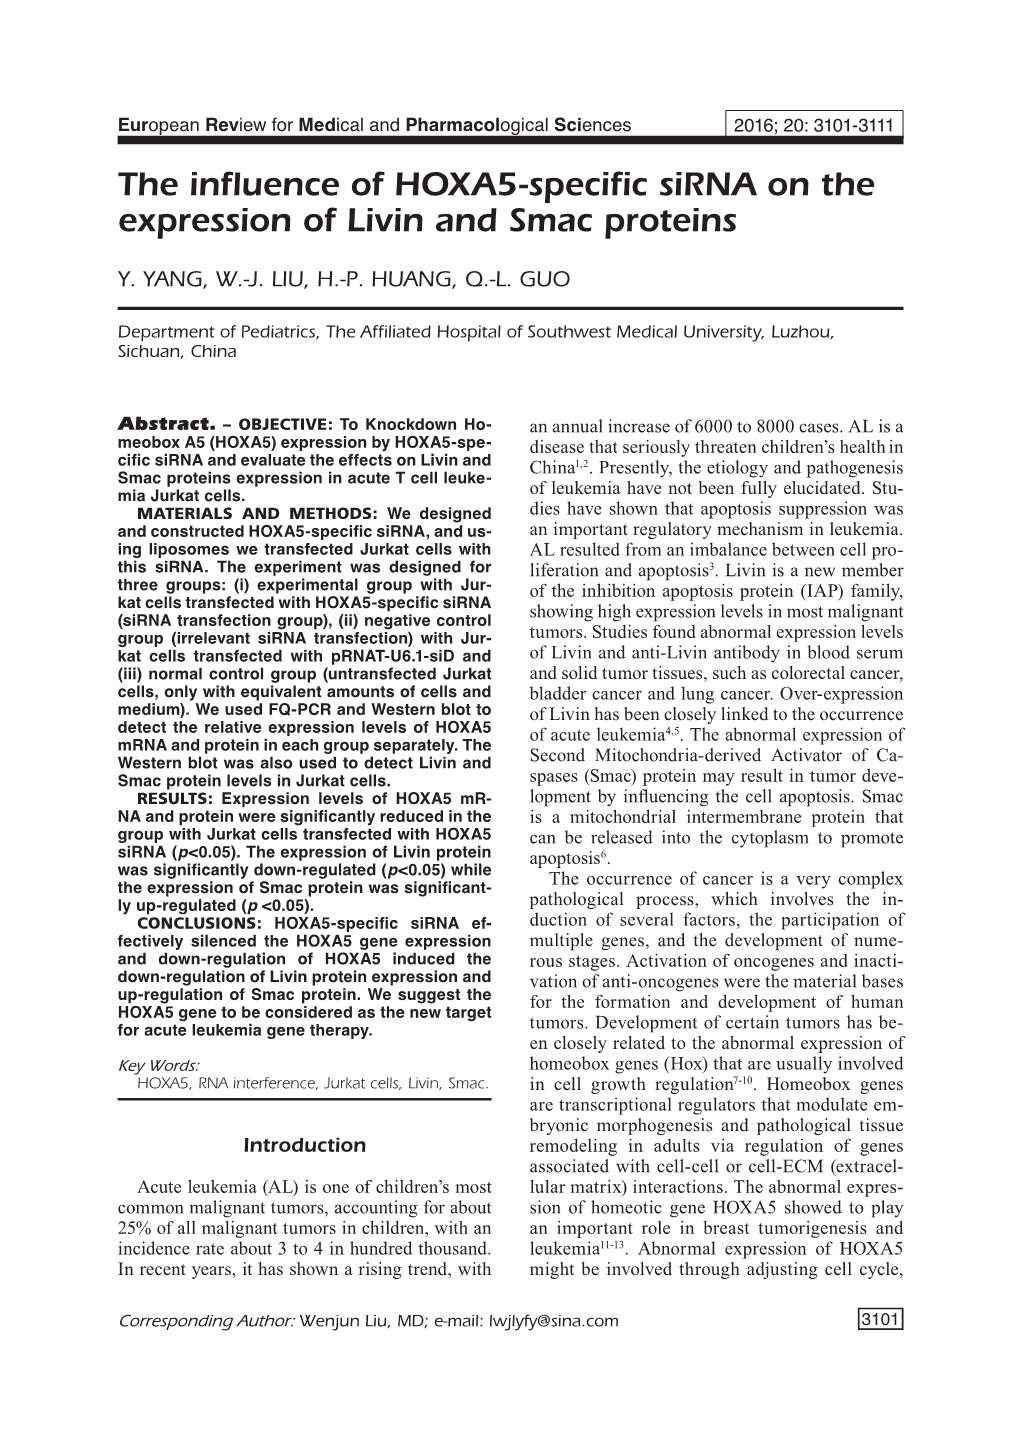 3101-3111-The Influence of HOXA5-Specific Sirna on The